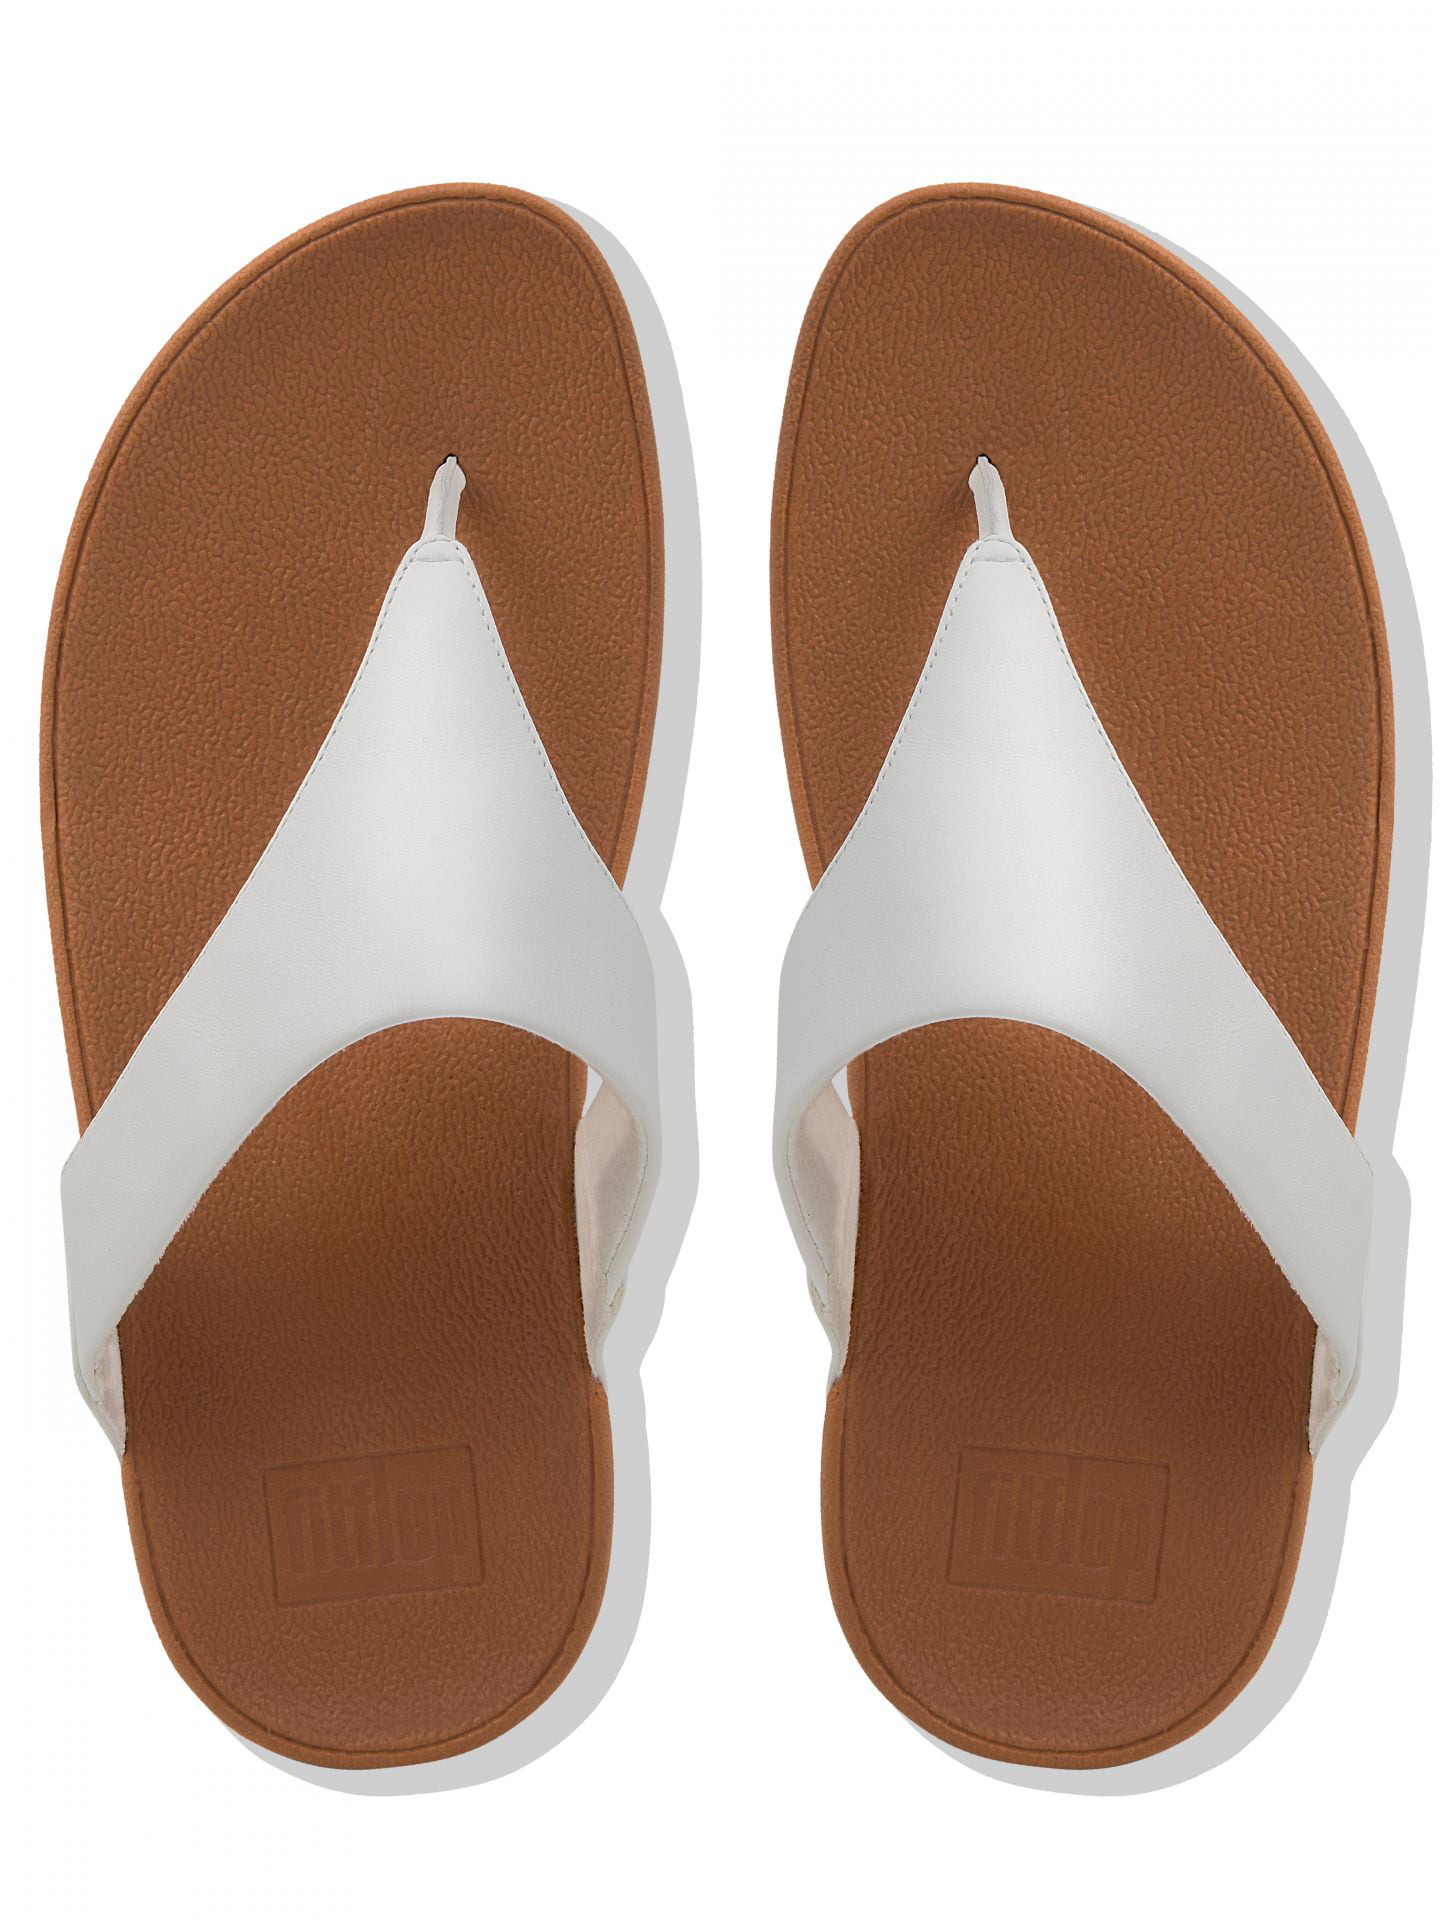 fitflops white leather